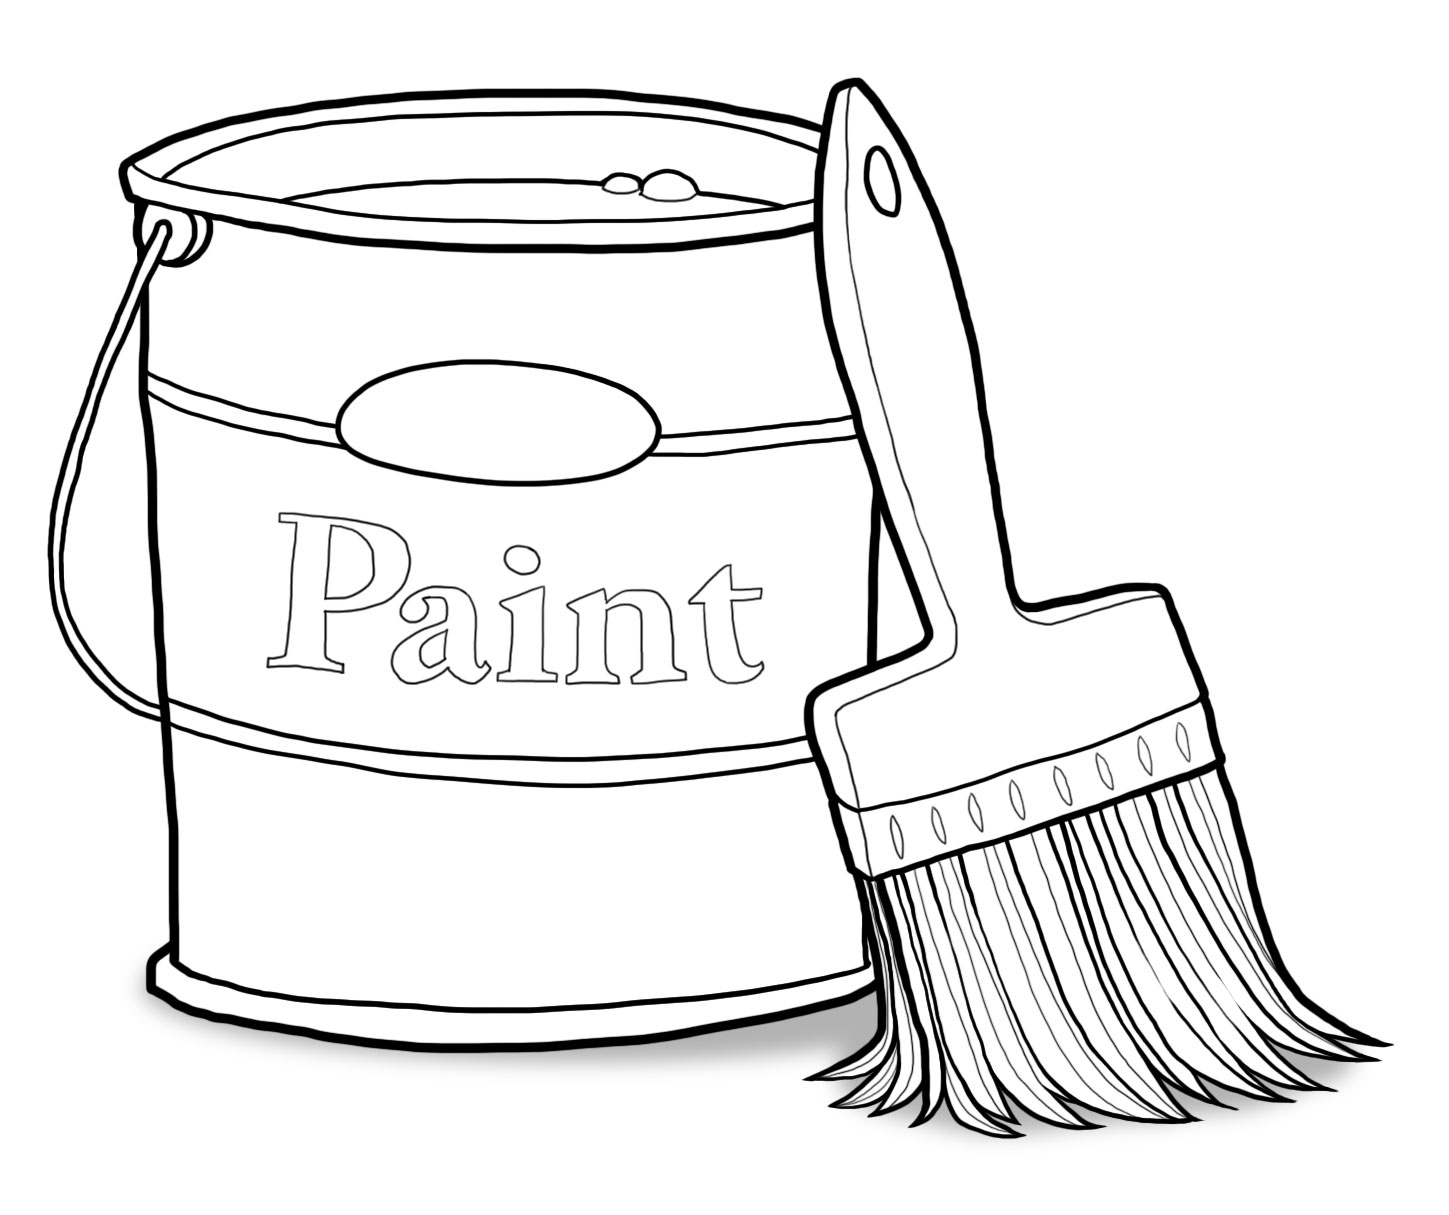 Paint can clipart black and white